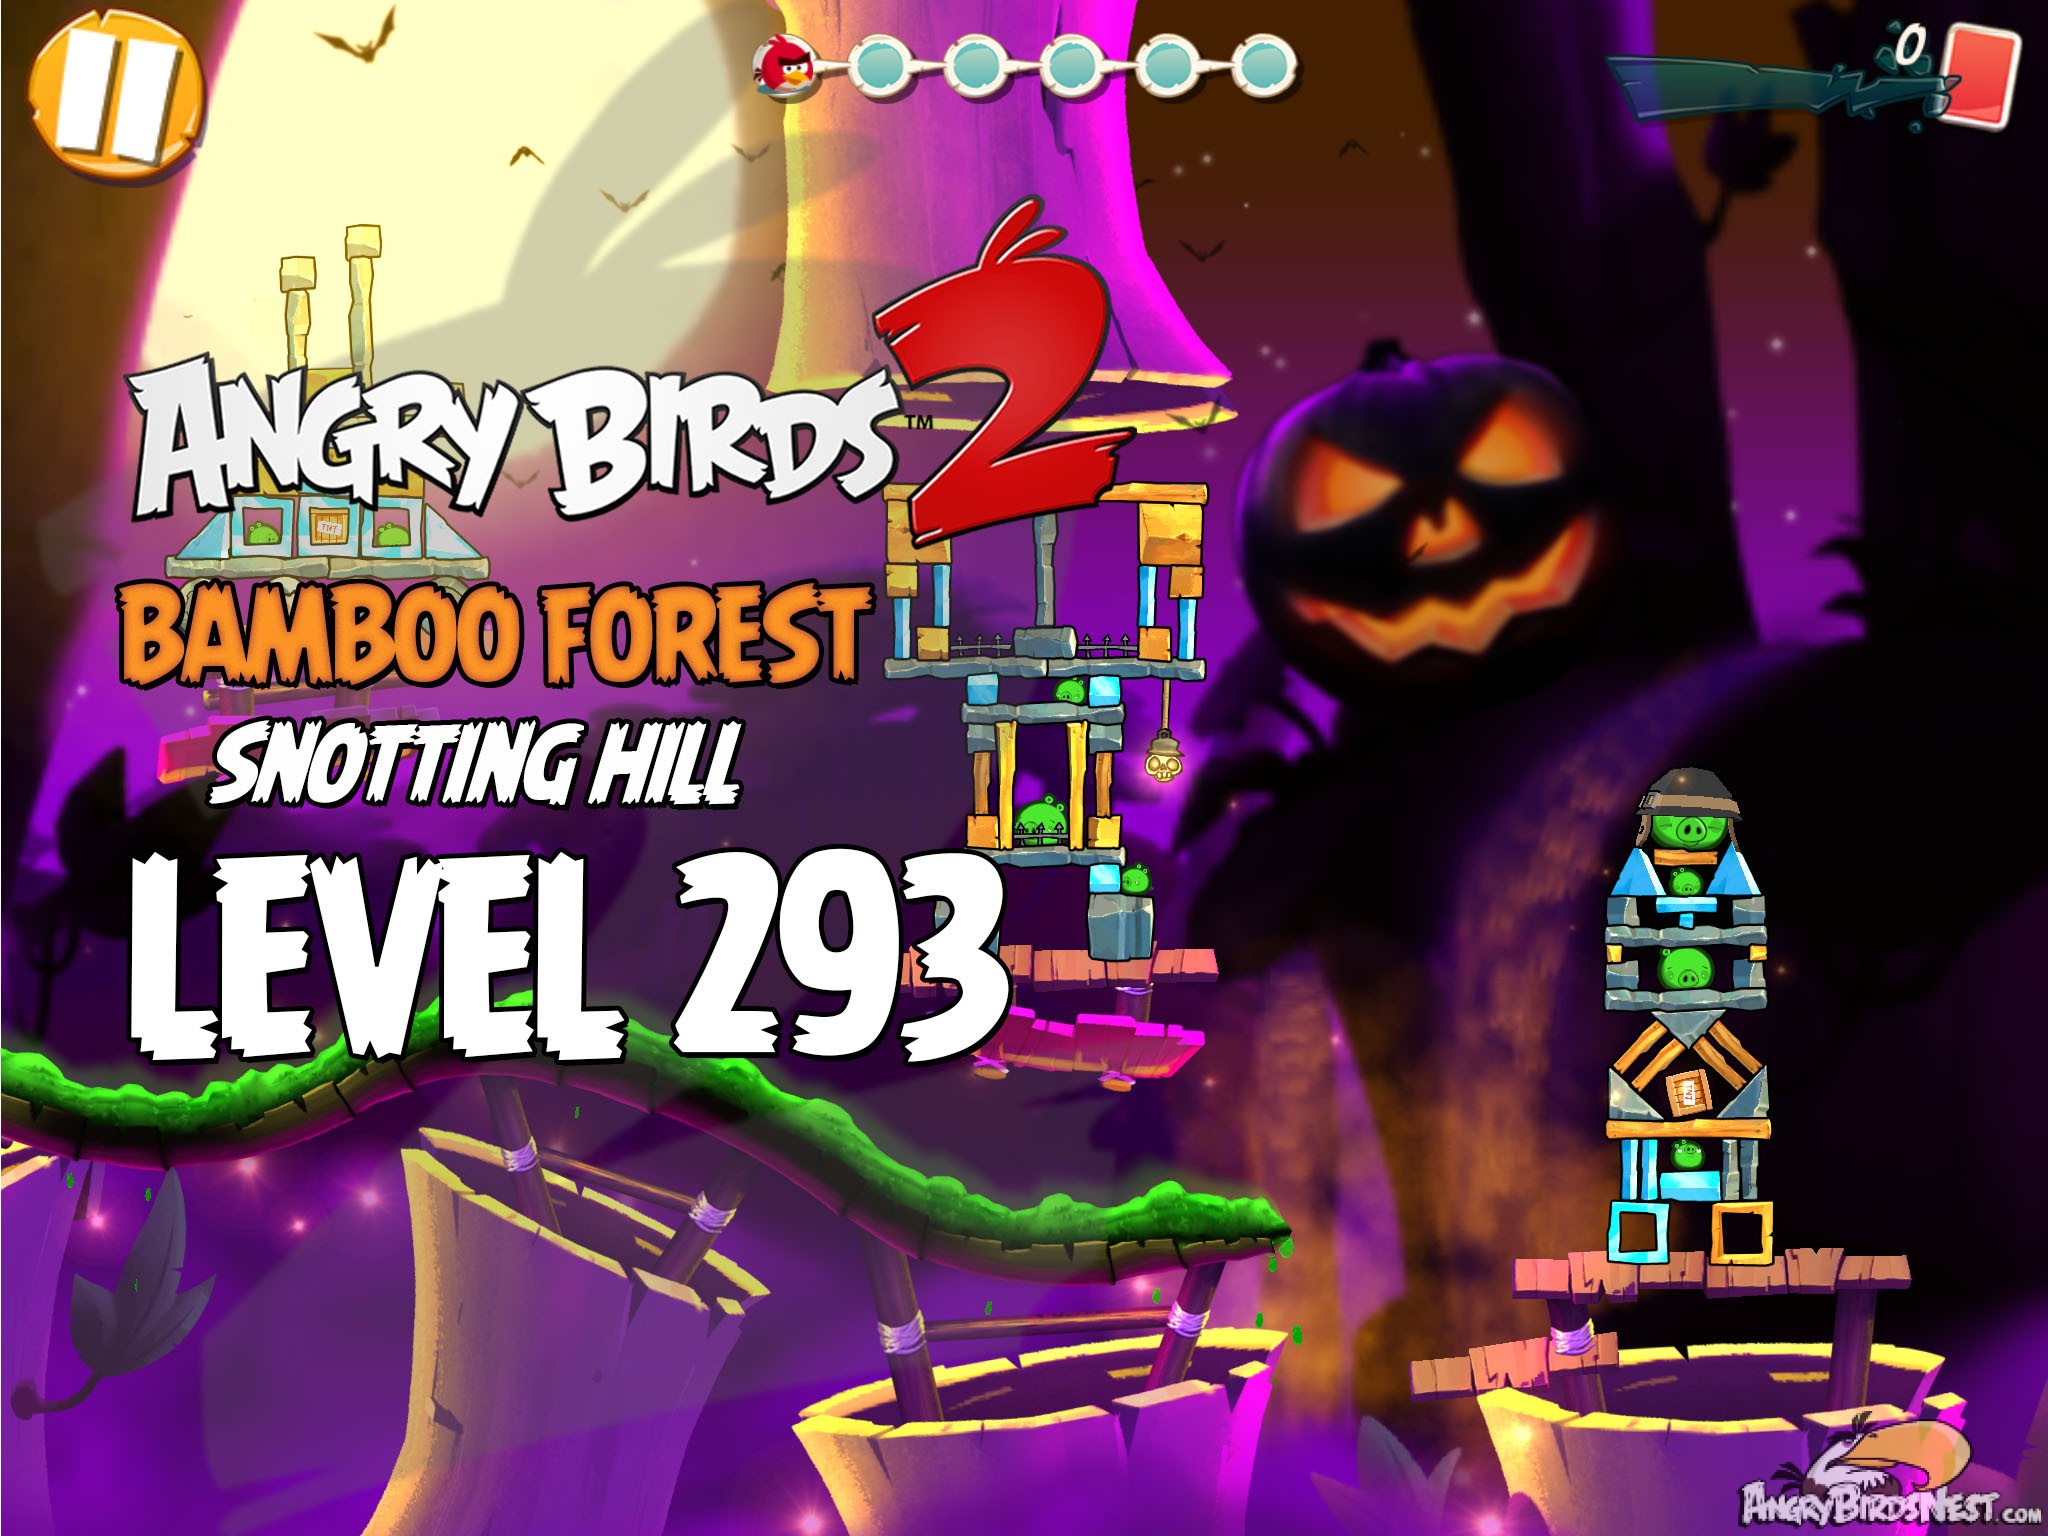 Angry Birds 2 Bambbo Forest Snotting Hill Level 293